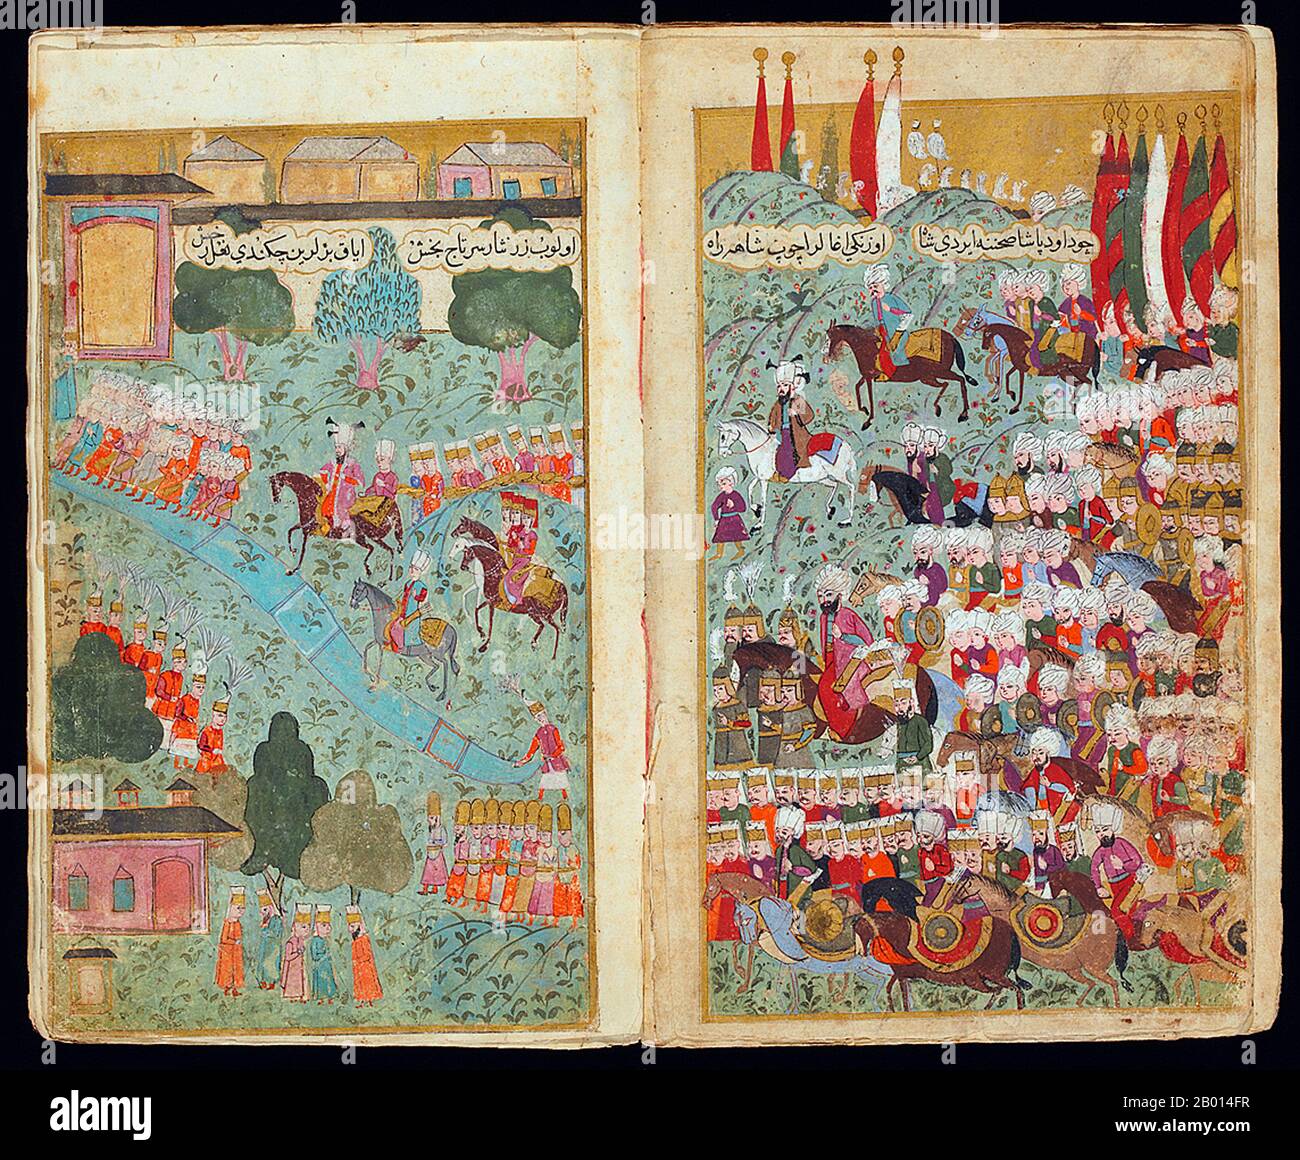 Turkey: ' The reception of Mehmet III in Davudpasha'. Miniature paintings from an illustrated manuscript depicting the 1596 military campaign in Hungary by Ottoman Sultan Mehmed III, c. 1600.  Mehmed III Adli (May 26, 1566 – December 21/22, 1603) was sultan of the Ottoman Empire from 1595-1603. He remains notorious for having nineteen of his brothers and half brothers murdered to secure power. He also killed over twenty of his sisters. They were all strangled by deaf-mutes. Mehmed III was an idle ruler, leaving government to his mother Safiye. Stock Photo